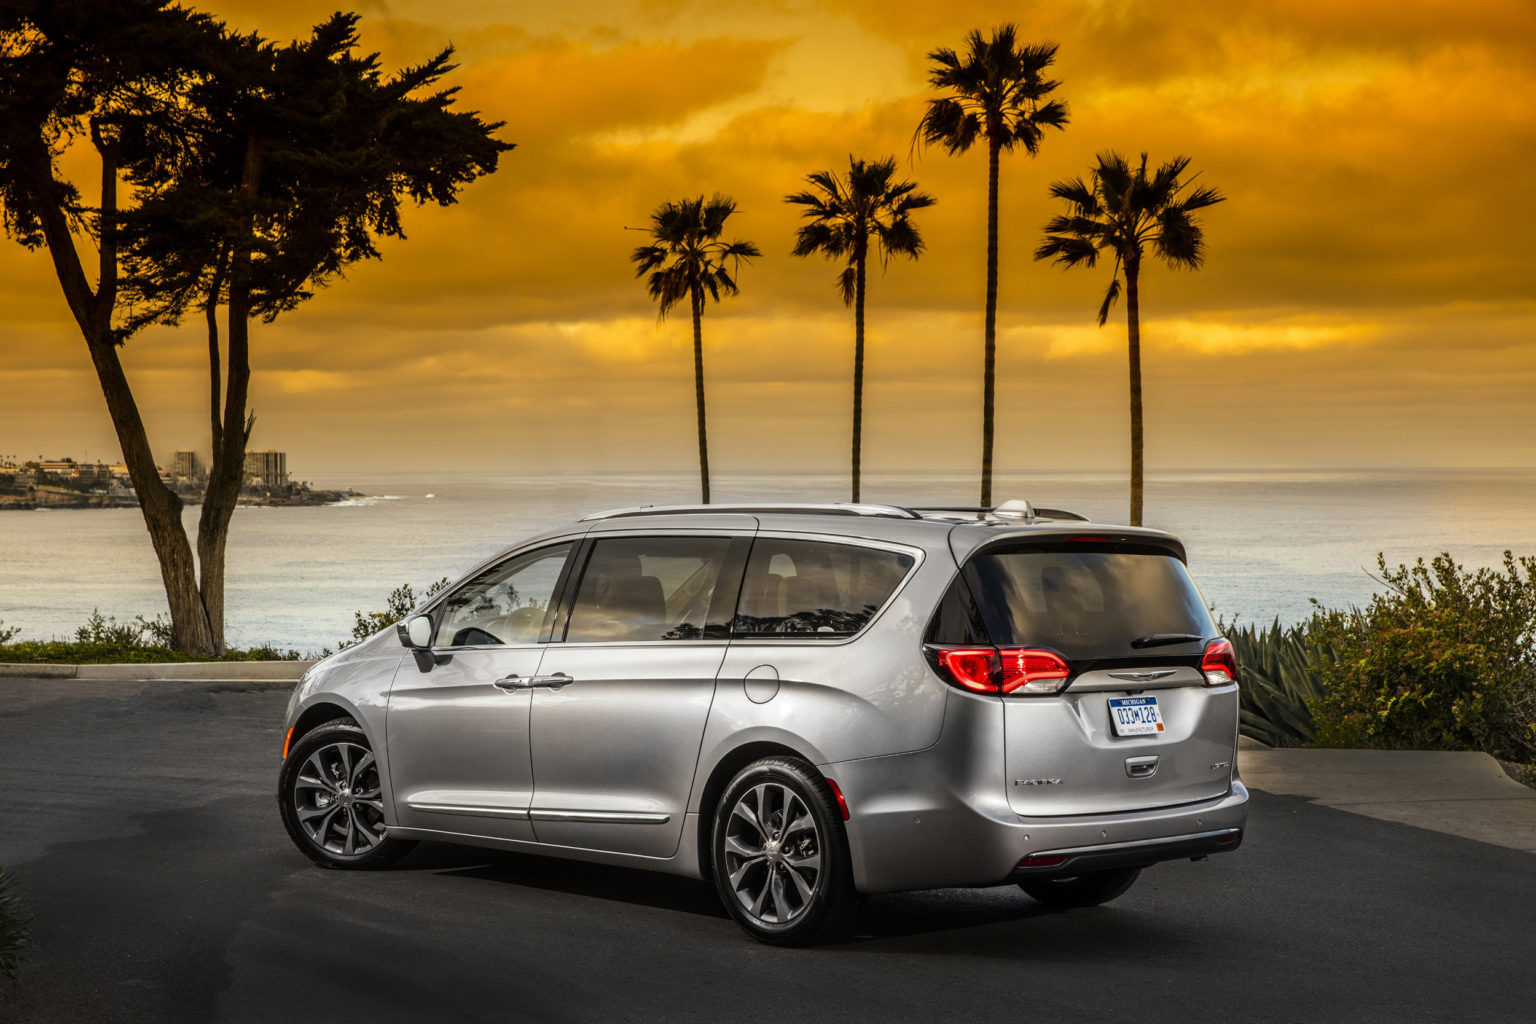 The 2020 Chrysler Pacifica retains much of what customers love for the 2020 model year.